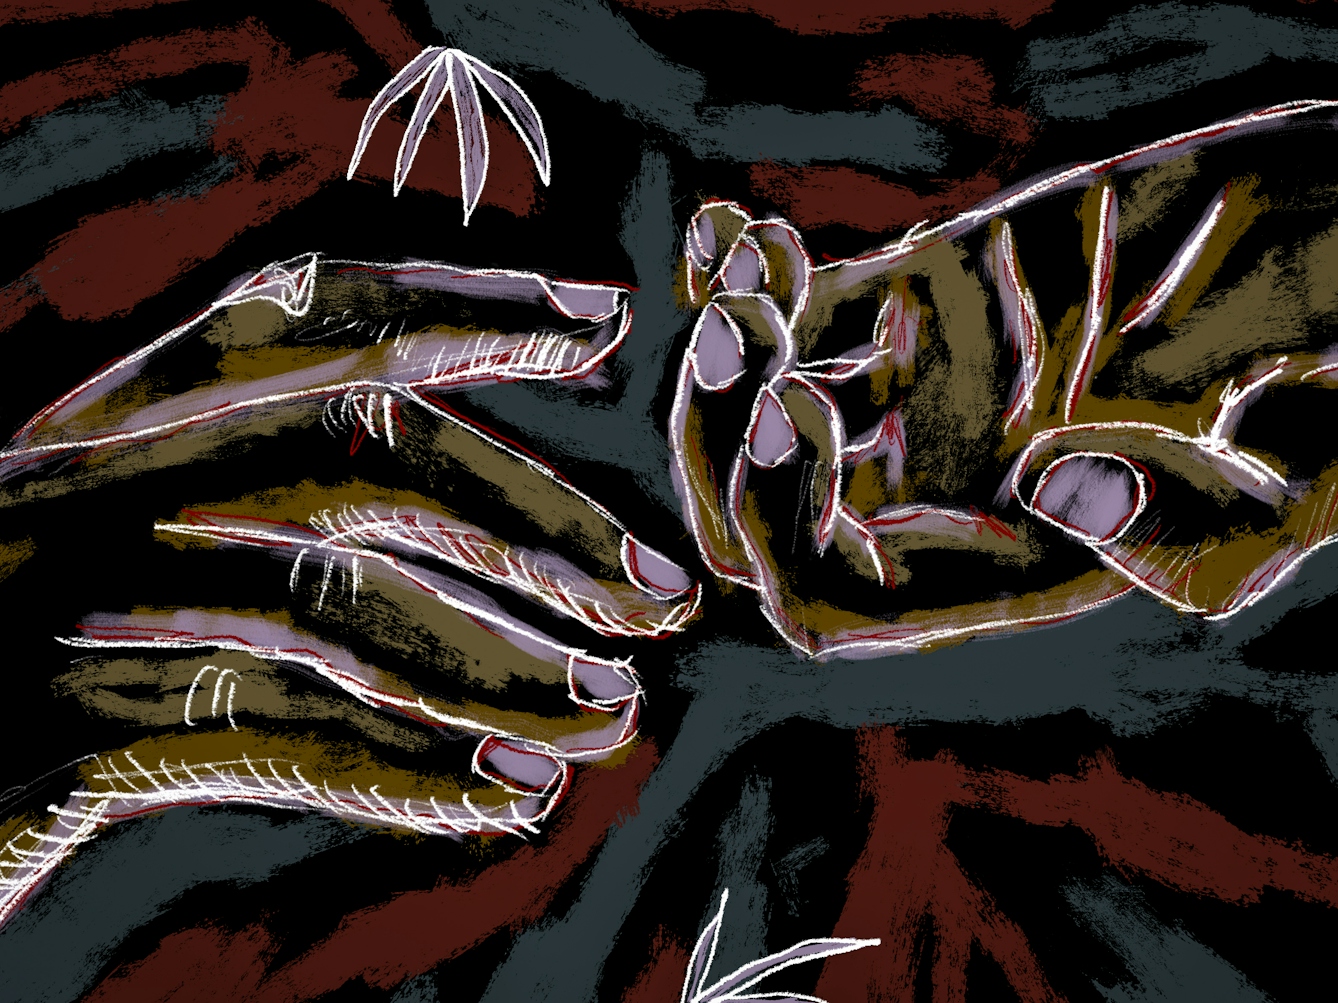 Detail from a larger colour digital artwork showing a figurative study of a pair of hands gracefully suspended in mid air, visible from just above the wrists. The hand on the right is held palm upwards, fingers slightly bent. The hand on the left is palm down, fingers extended slightly towards the other hand but not making contact. The background is made up of dark textured rough lines of dark red, dark blue greys and blacks, punctuated by white outlined leaf-like plants.